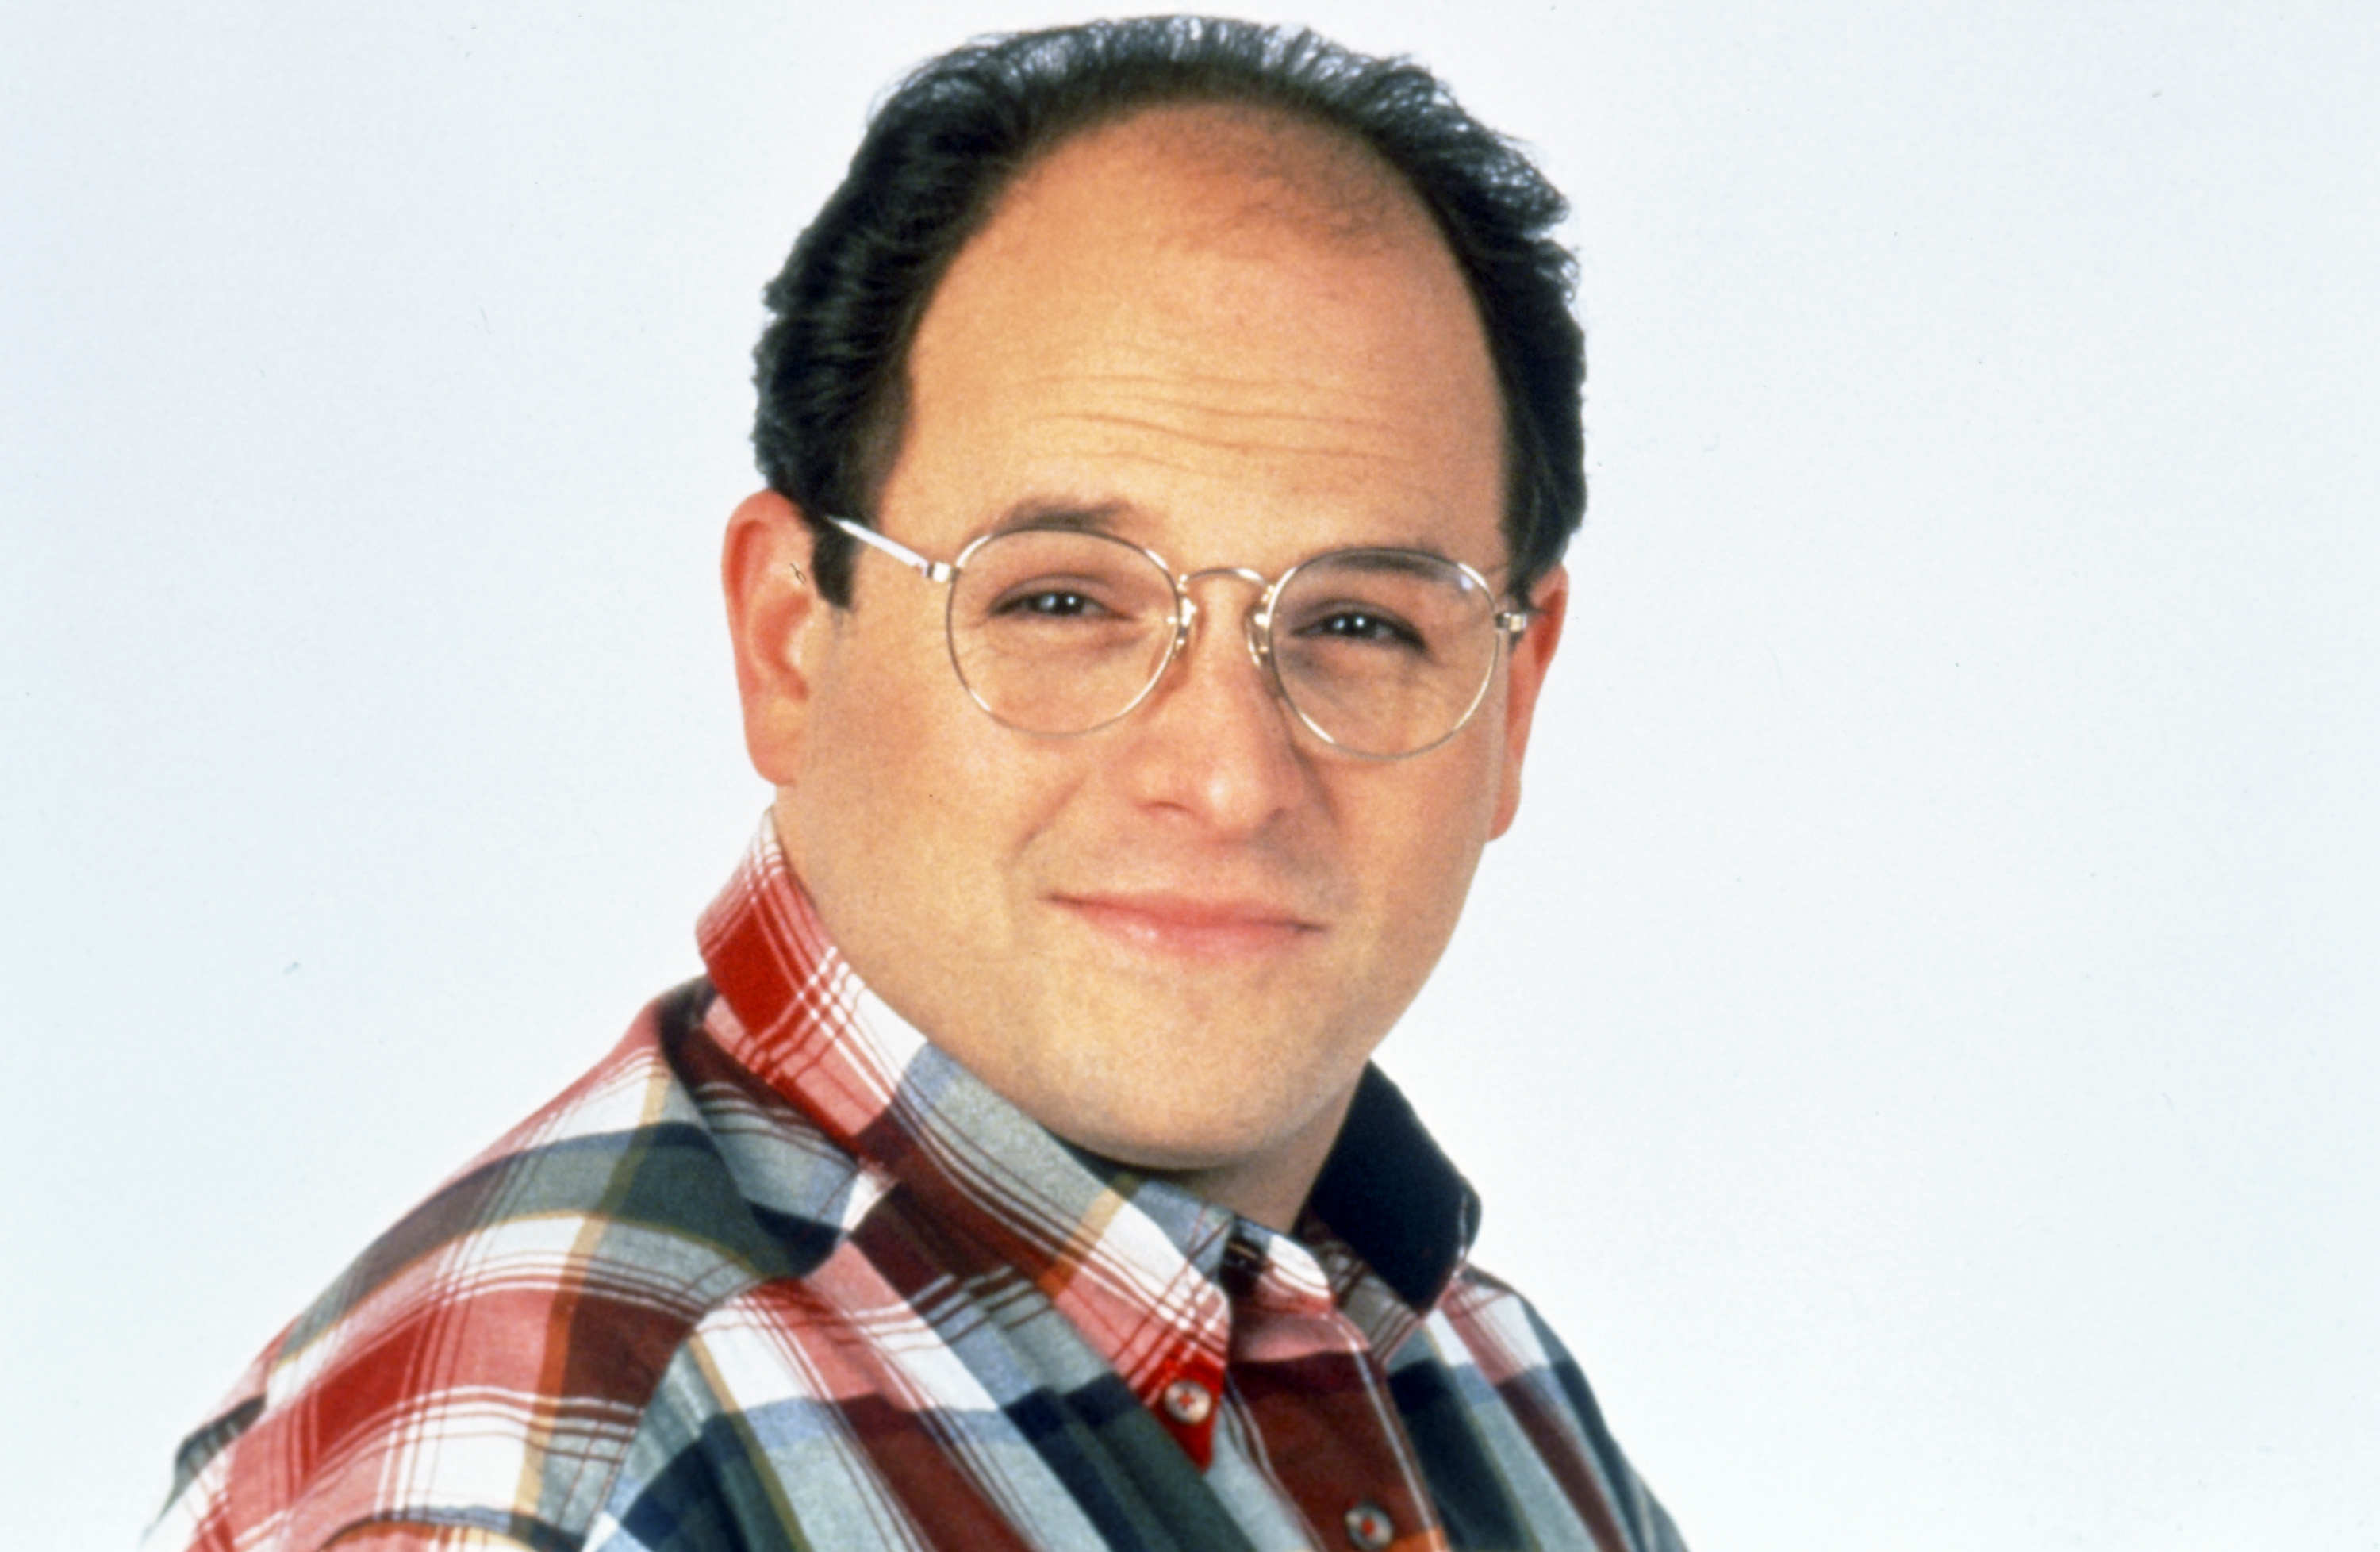 Jason Alexander wearing glasses and a collared shirt while portraying George Costanza